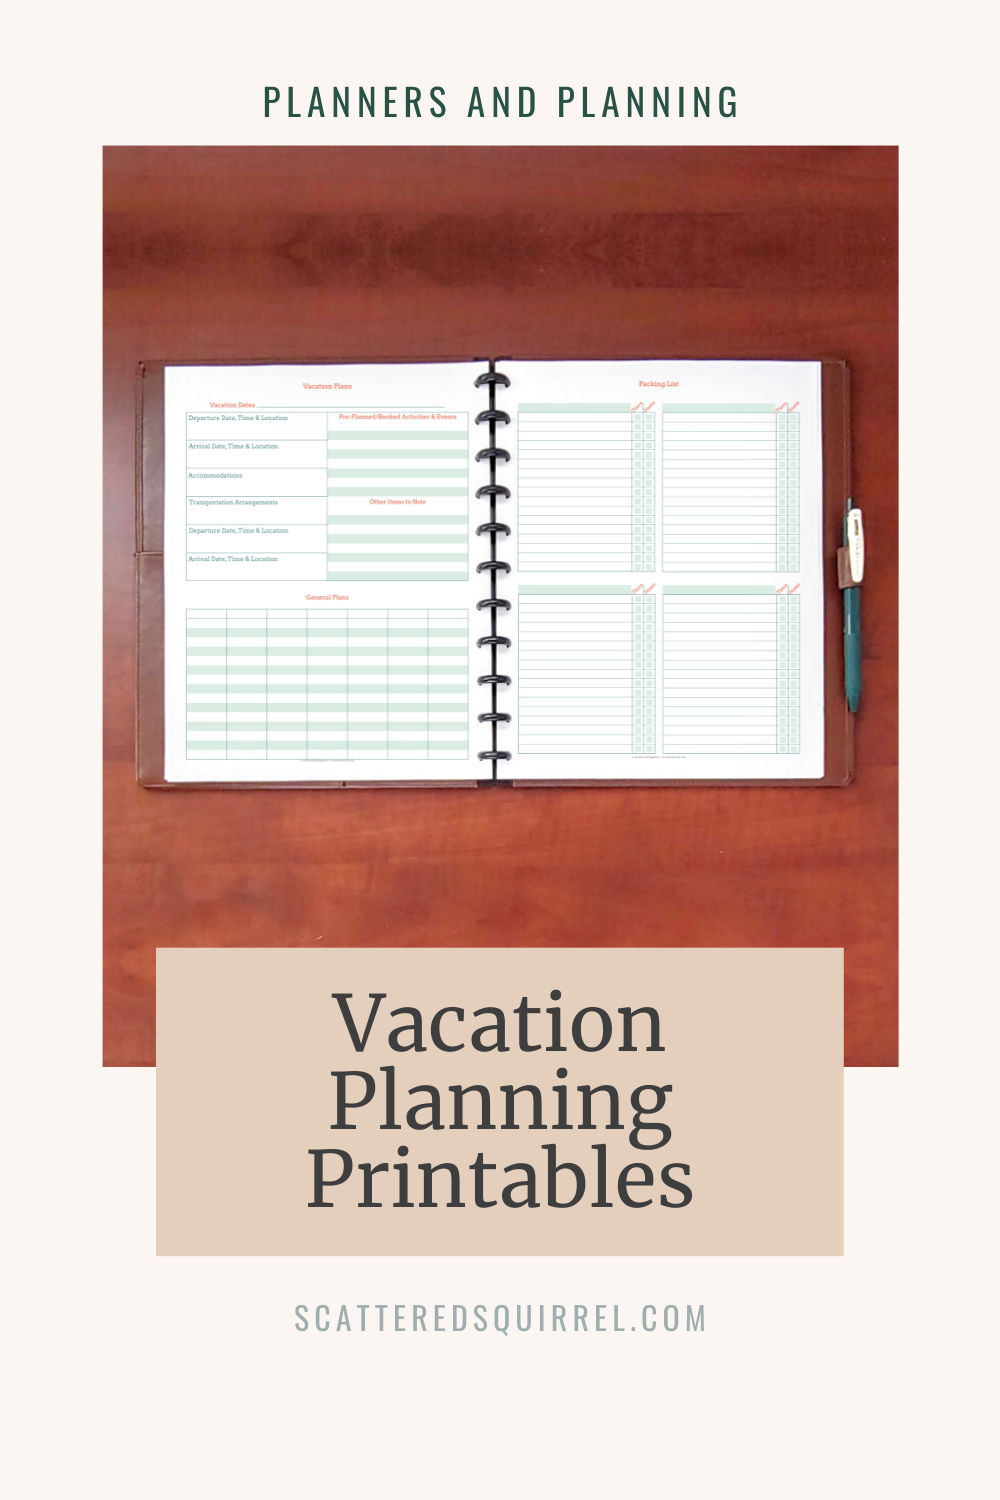 Vacation Planning Printable Sets to Make Your Next Trip a Breeze